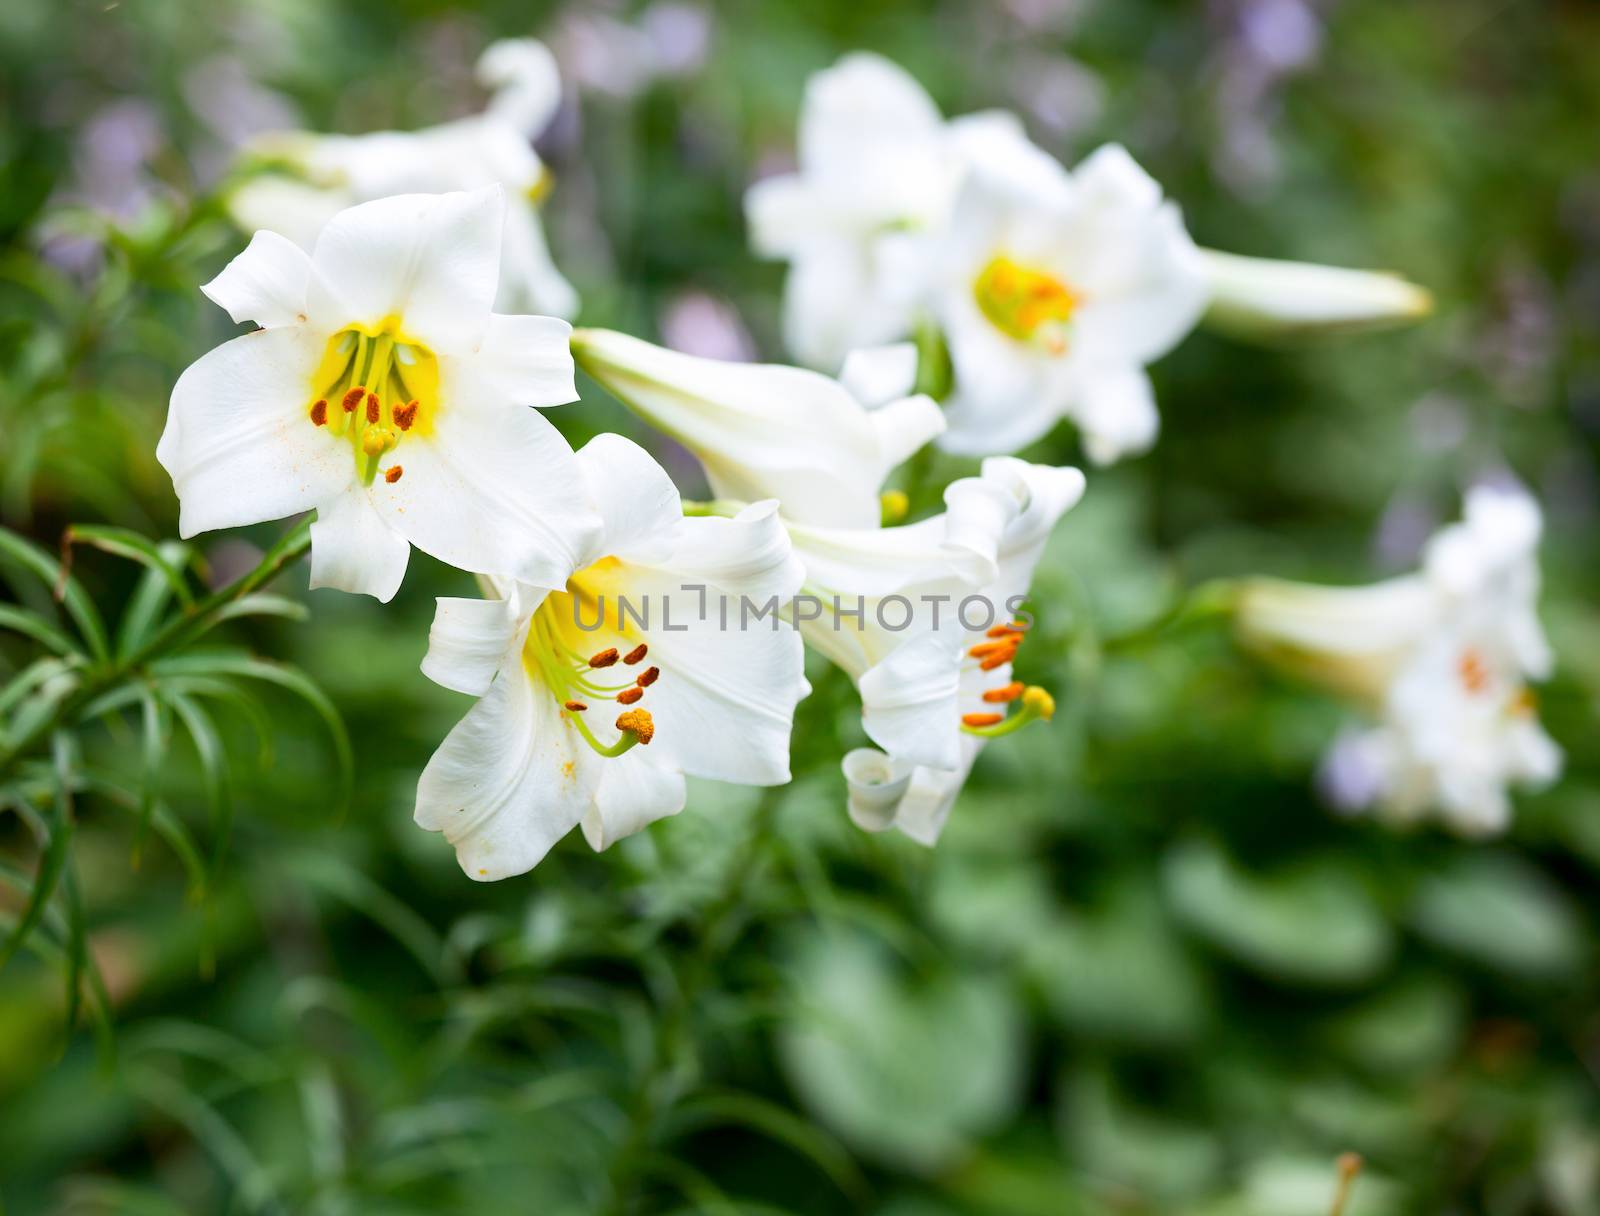 White Easter Lily flowers in a garden